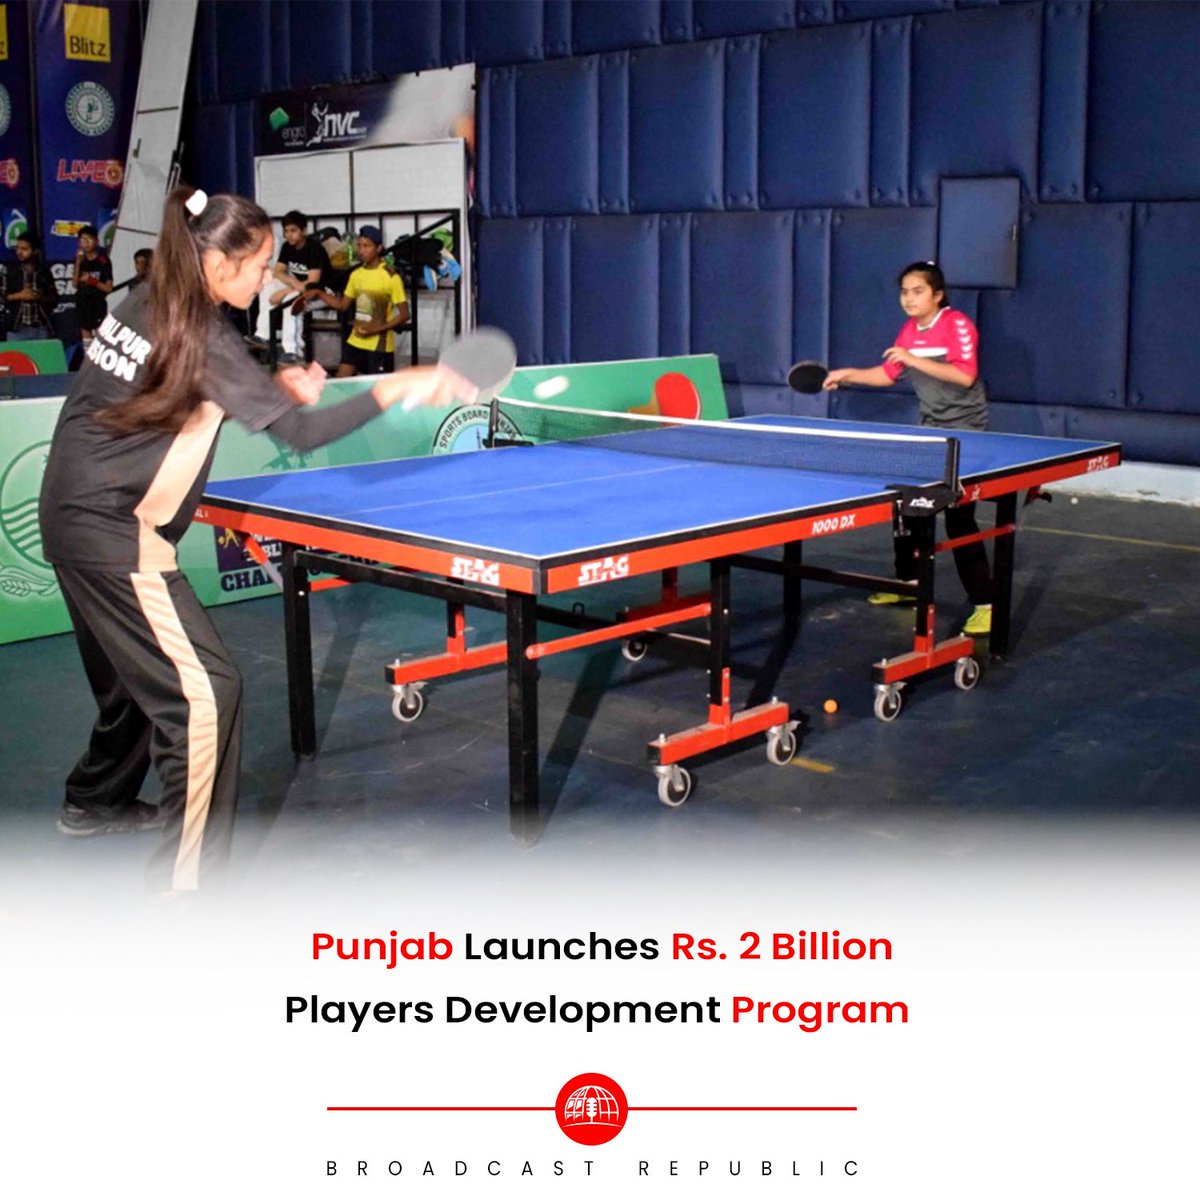 The Punjab government has launched a Players Development Program, allocating Rs. 2 billion to support the progress of deserving sportspersons based on merit. 

#BroadcastRepublic #PlayersDevelopment #SportsFunding #PunjabGovernment #AthleteSupport #SportsBoardPunjab